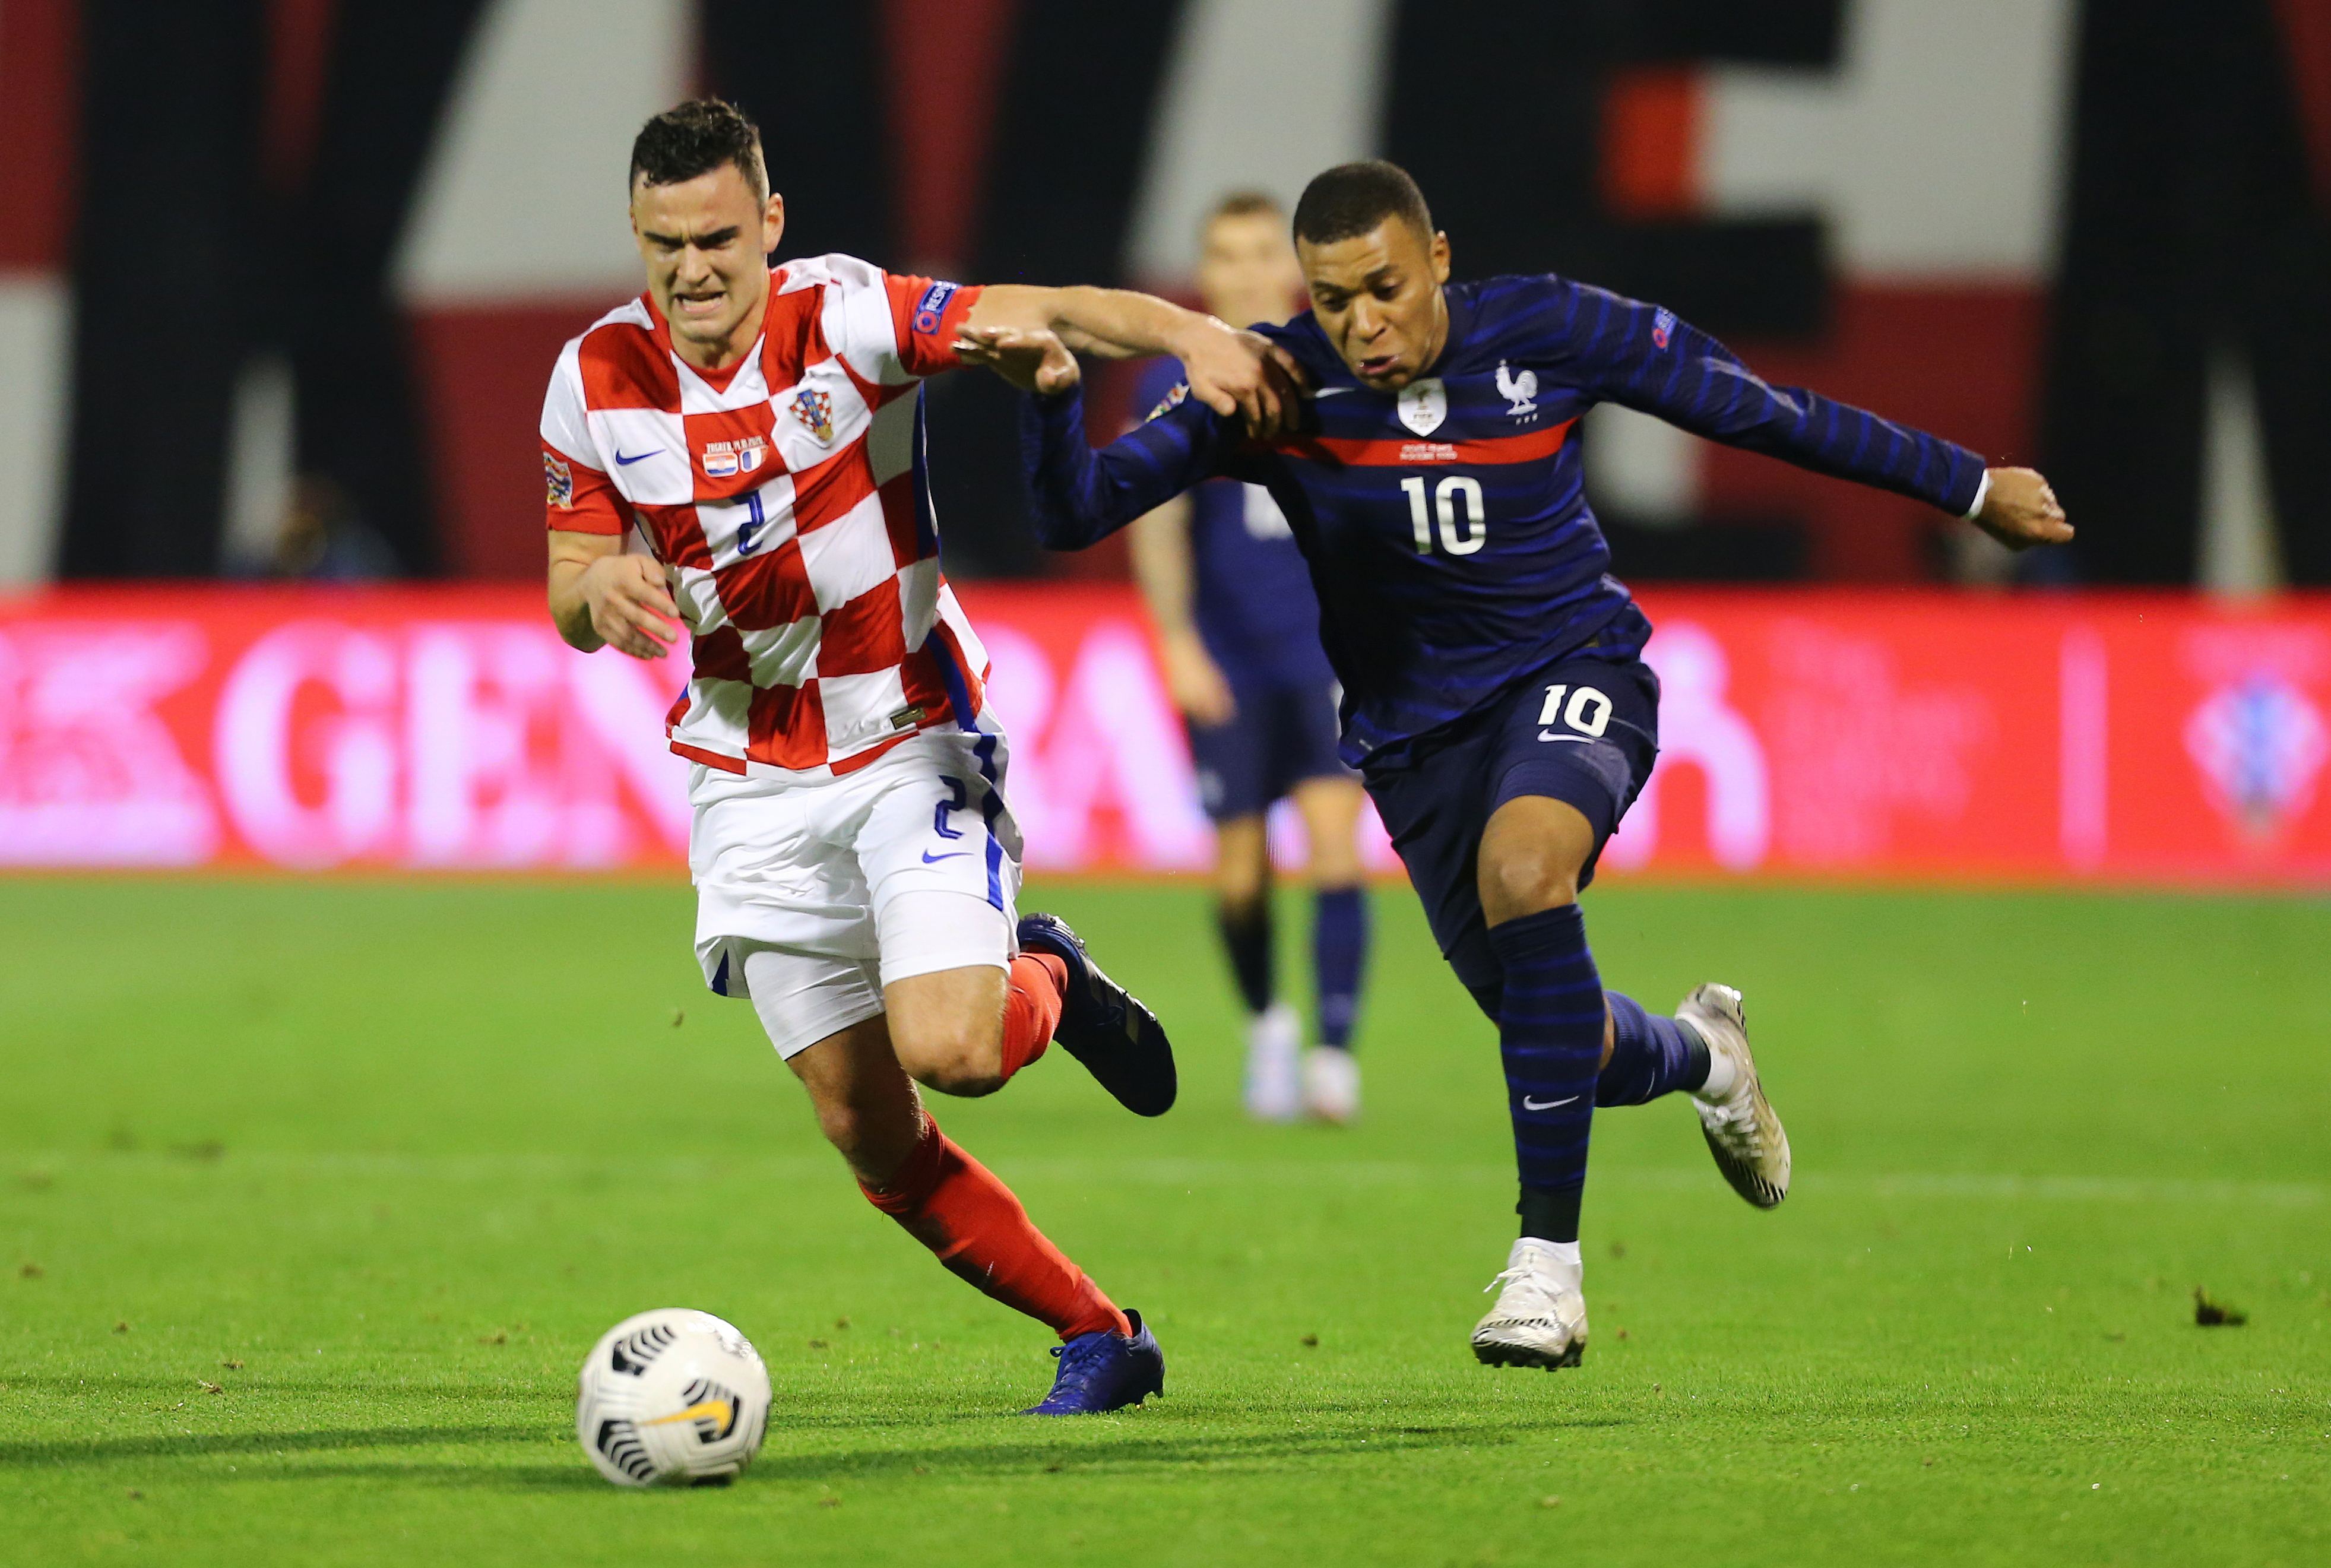 France's Kylian Mbappe in action with Croatia's Filip Uremovic  during their UEFA Nations League League A Group 3 match at  Stadion Maksimir, Zagreb, Croatia, at October 14, 2020. Photo: Reuters